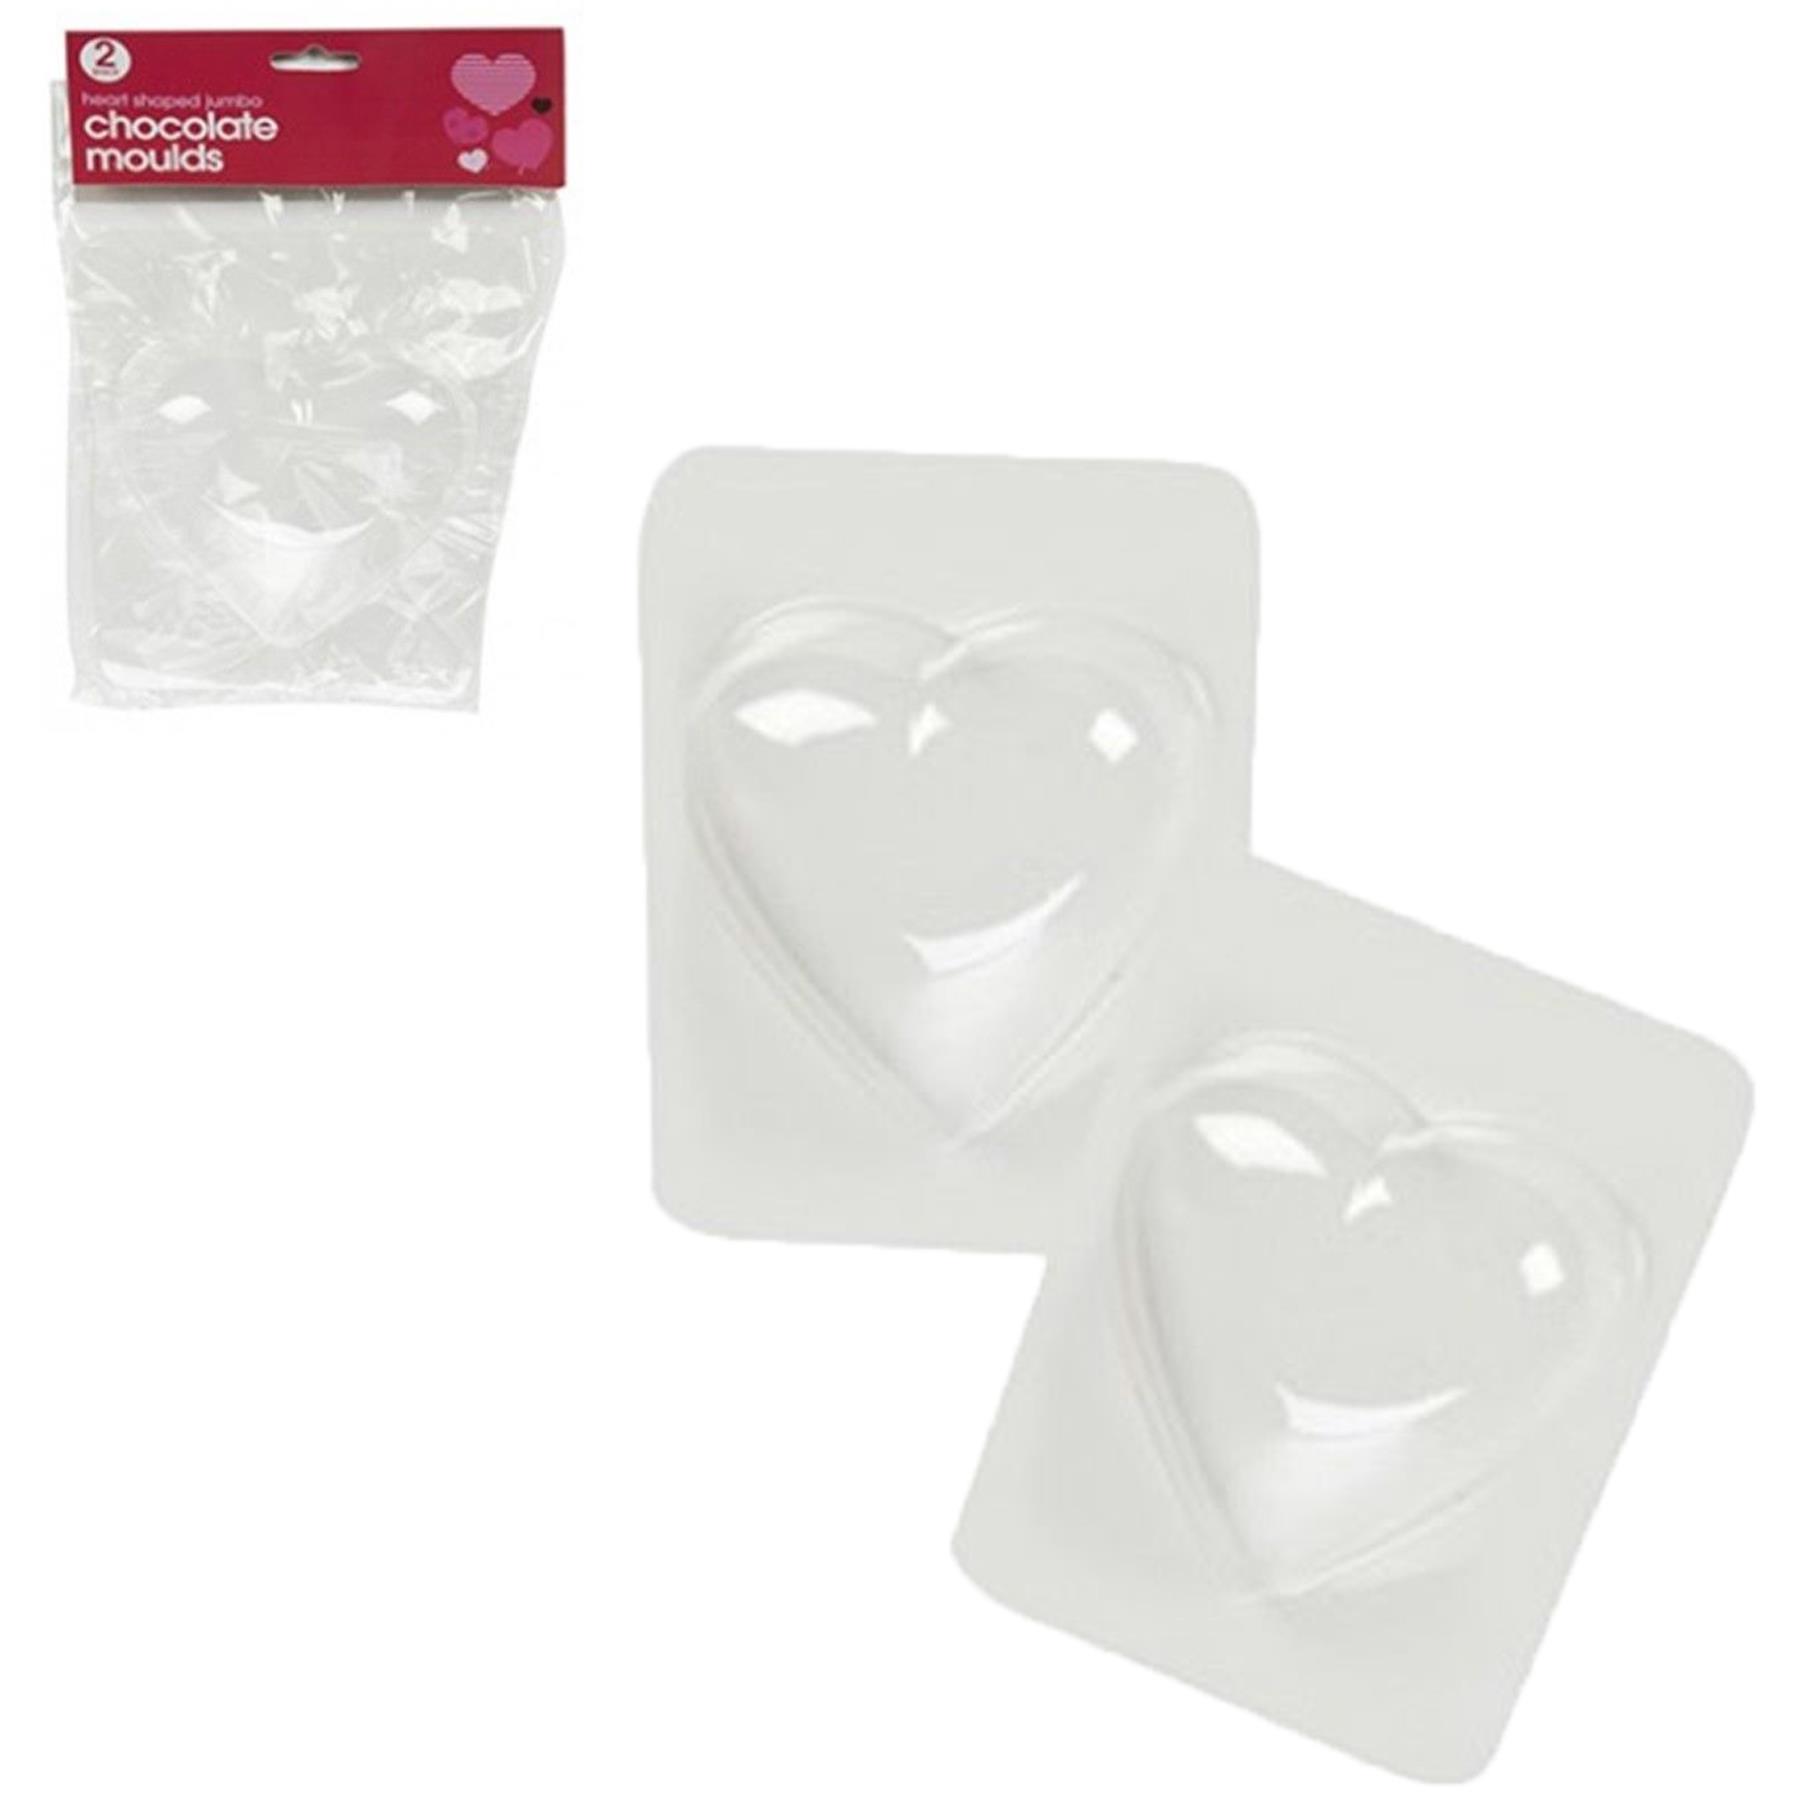 Valentines Chocolate Heart Moulds Pack of 2